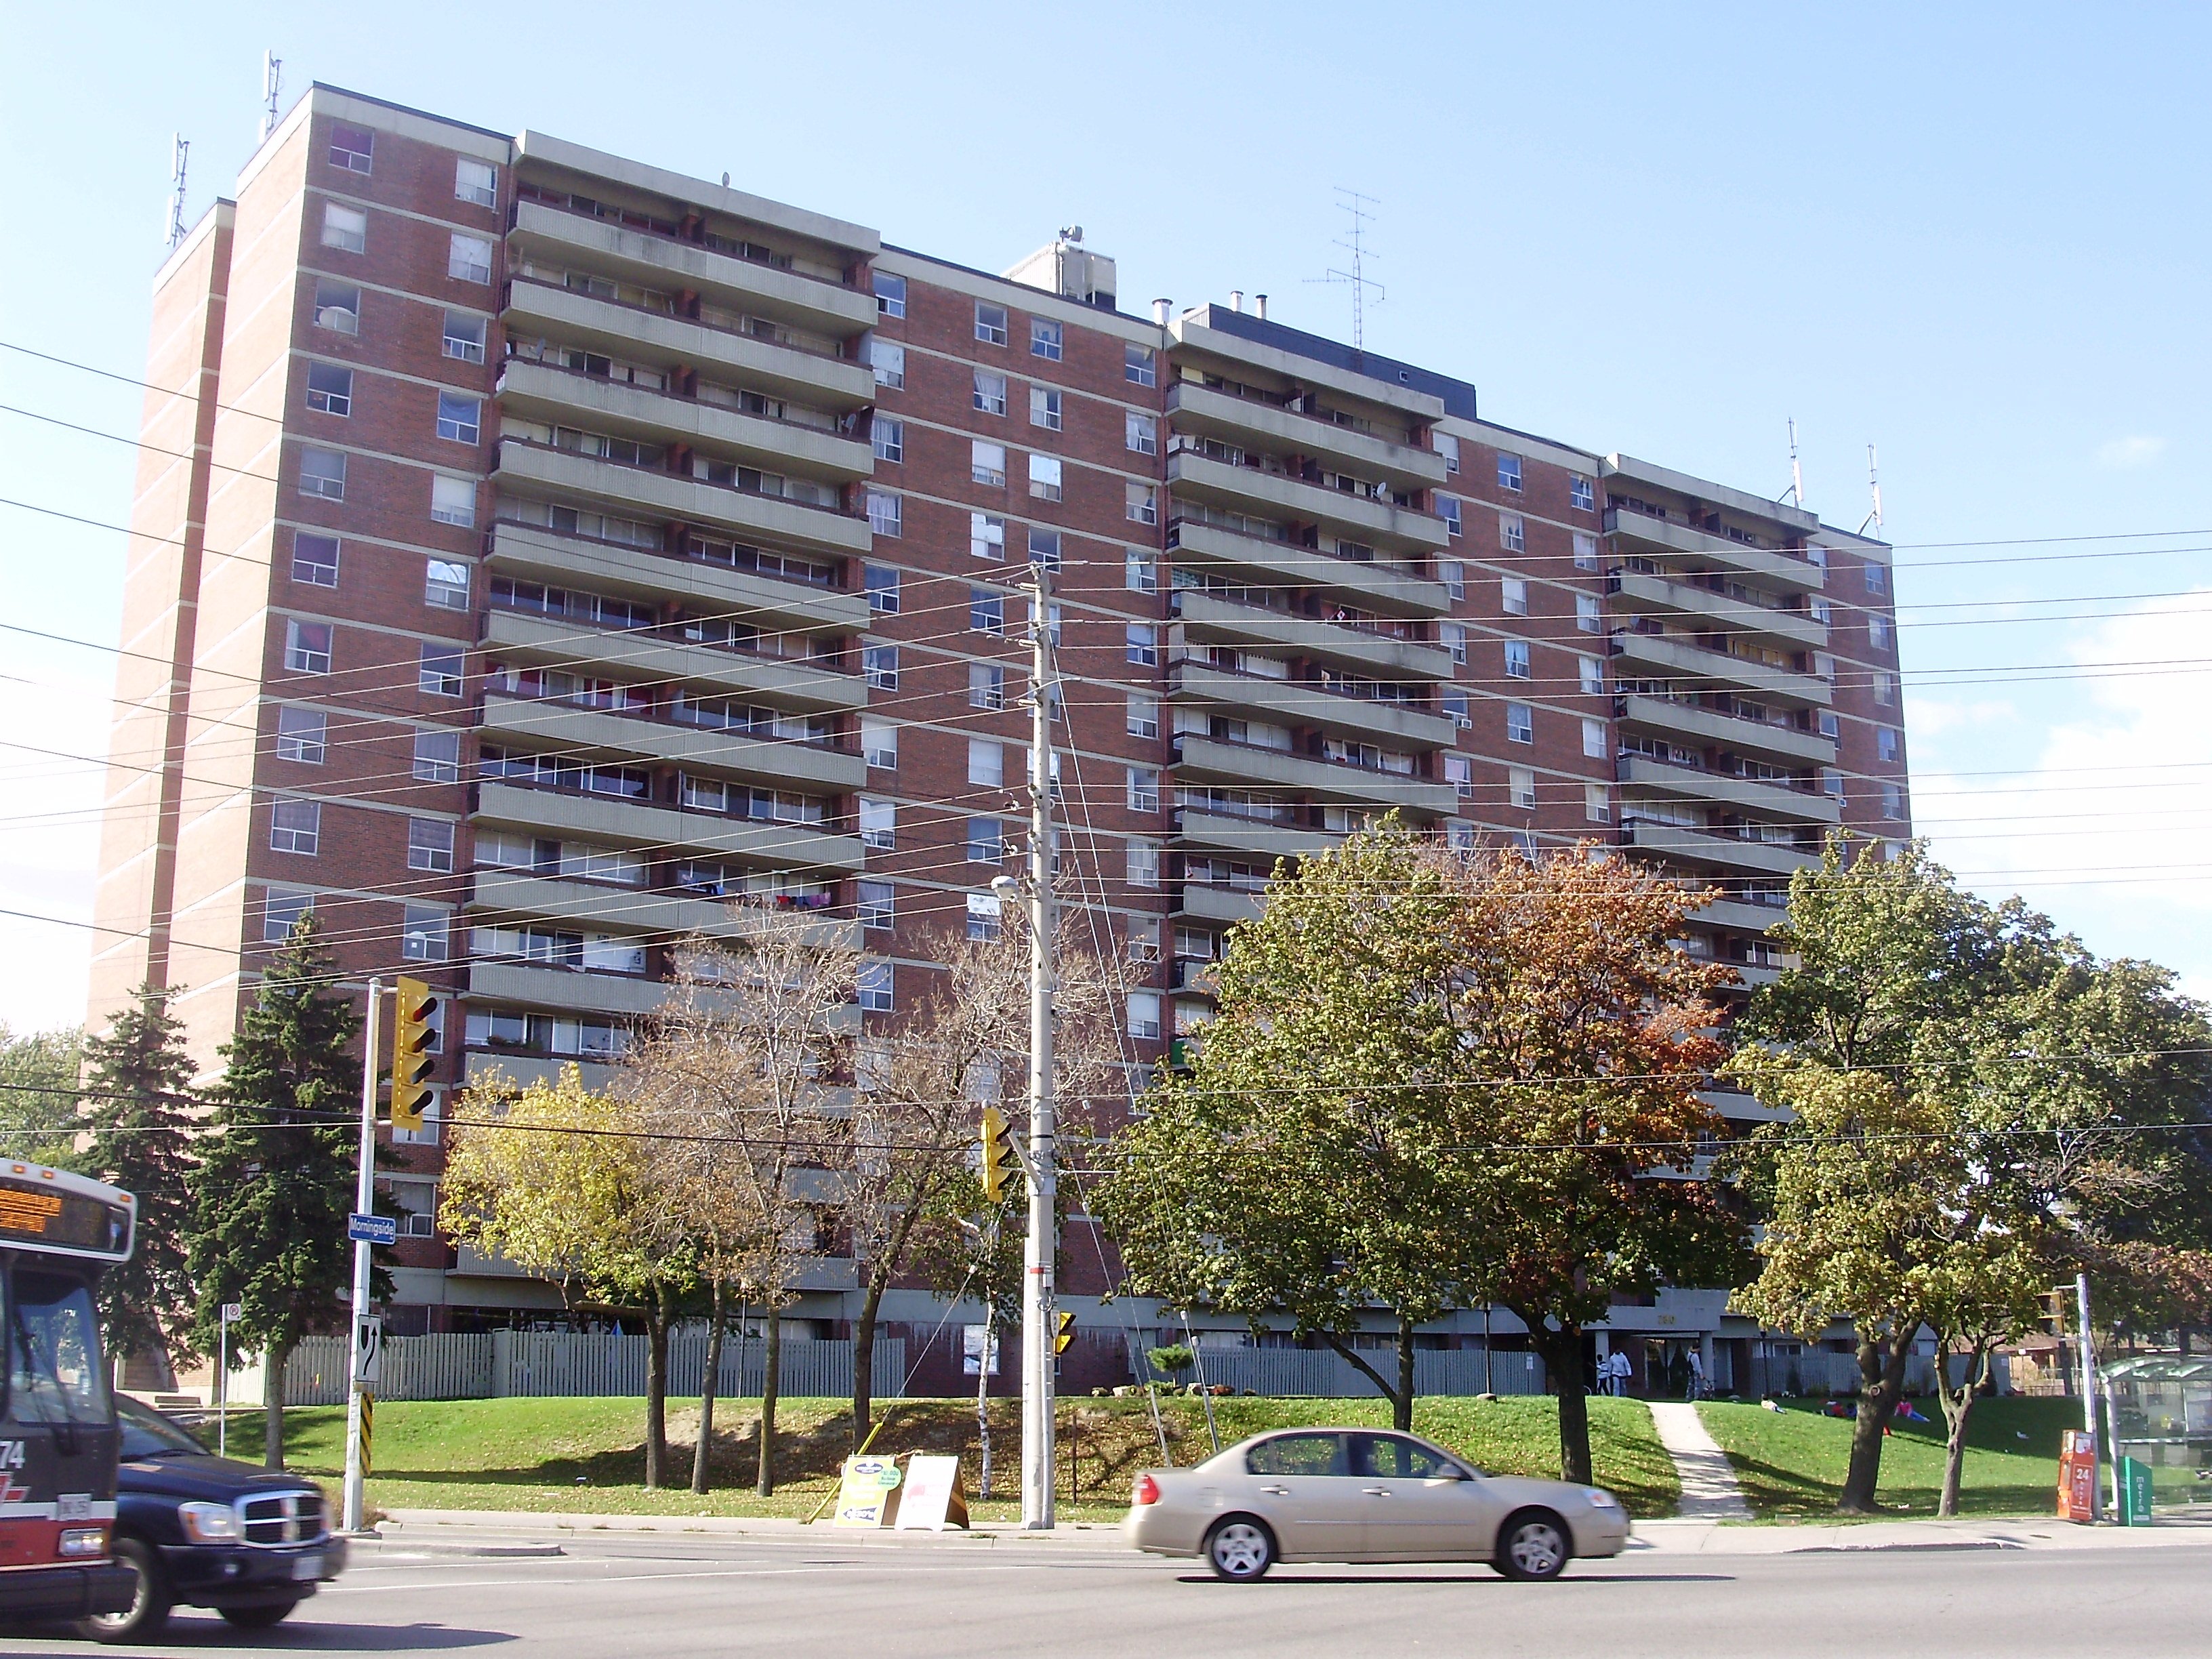 Kingston_and_Morningside_Apartments_West_Hill_Scarborough.jpg